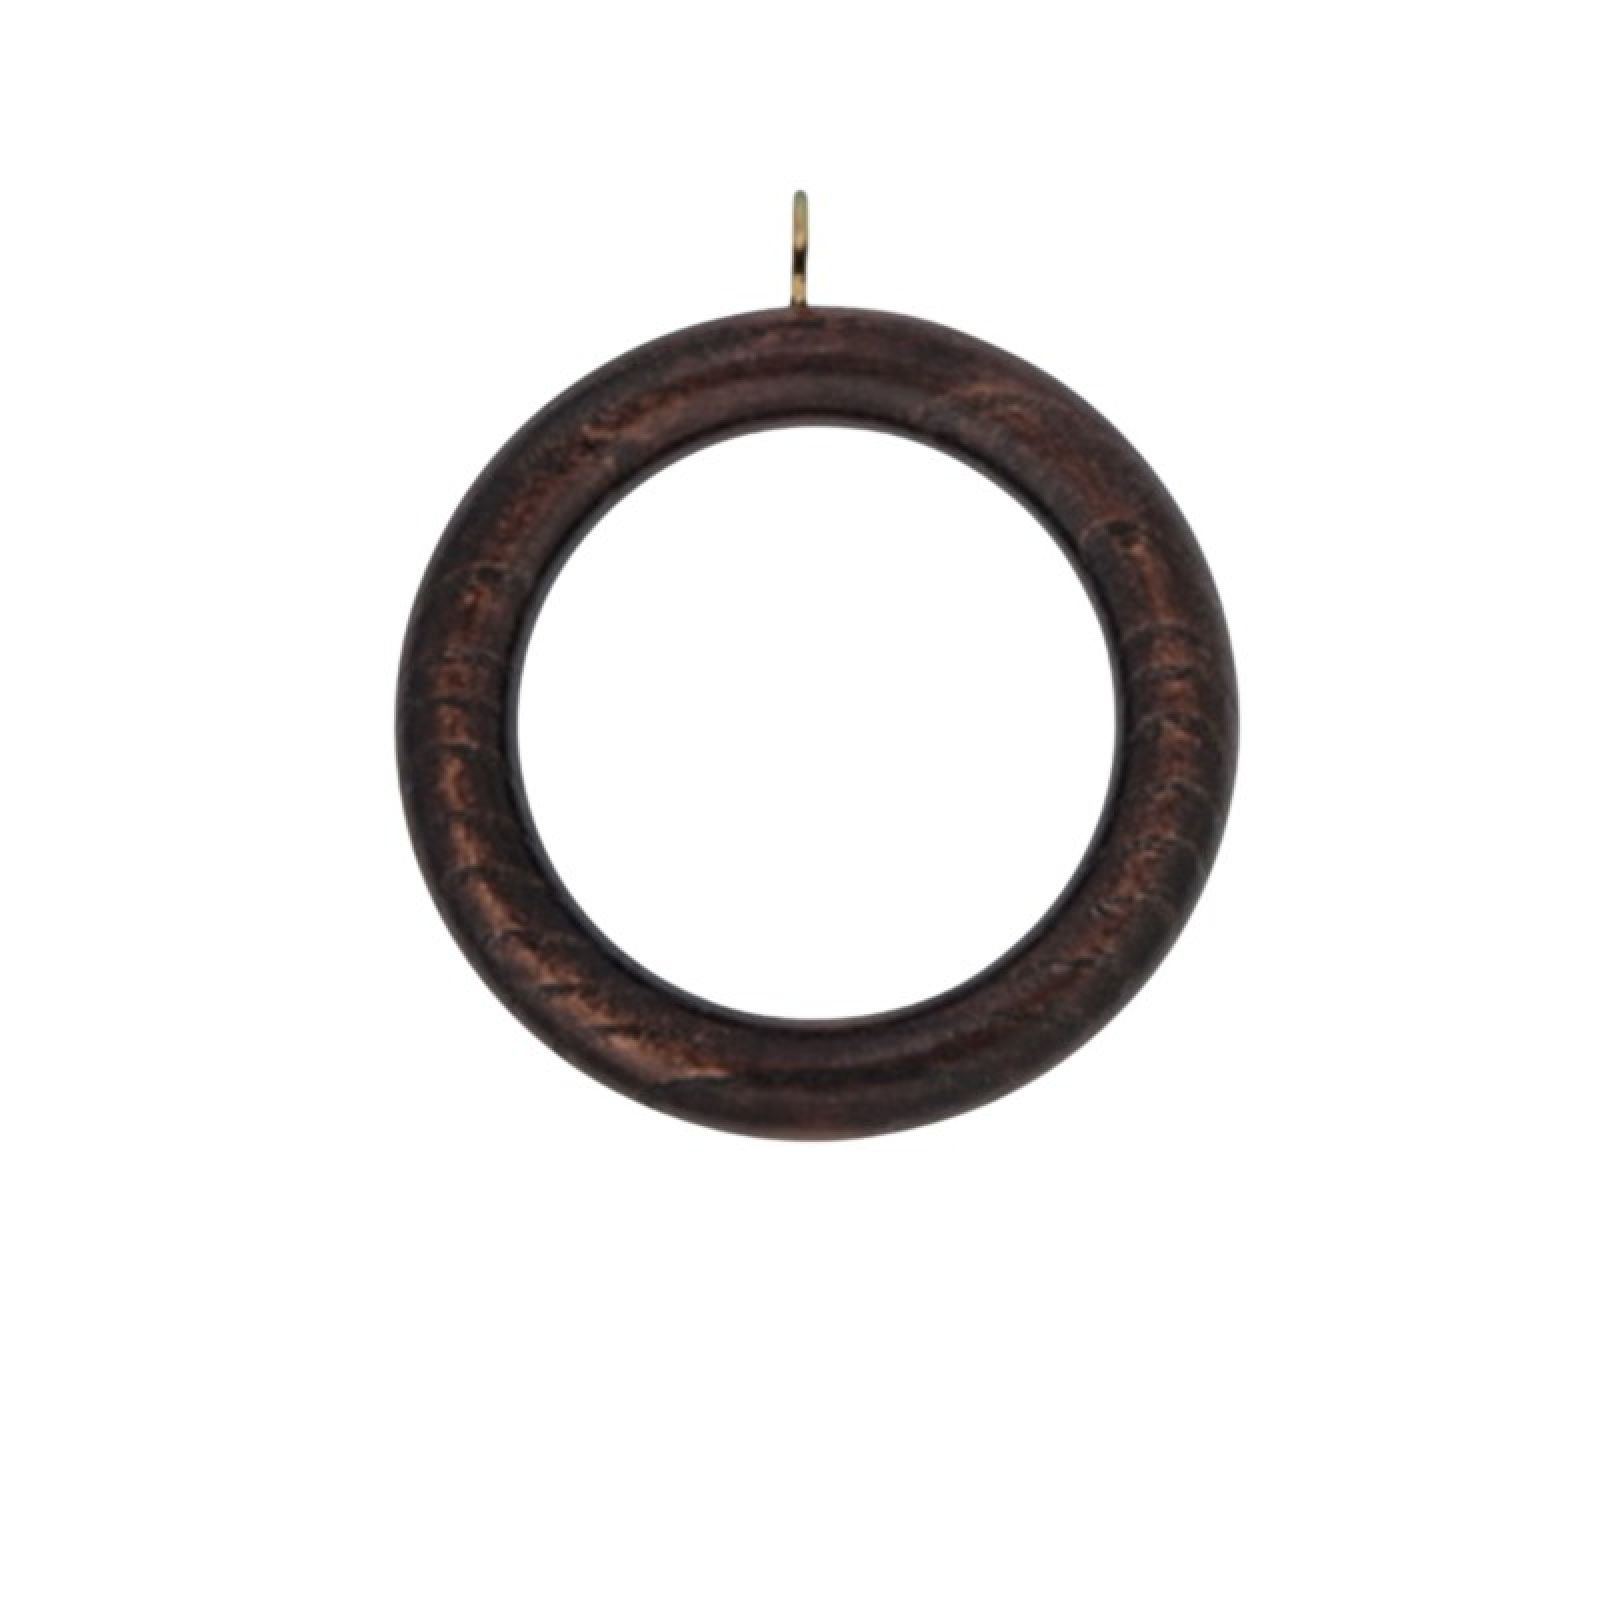 Curtain Rings The Victorian Emporium, Large Curtain Rings Wood